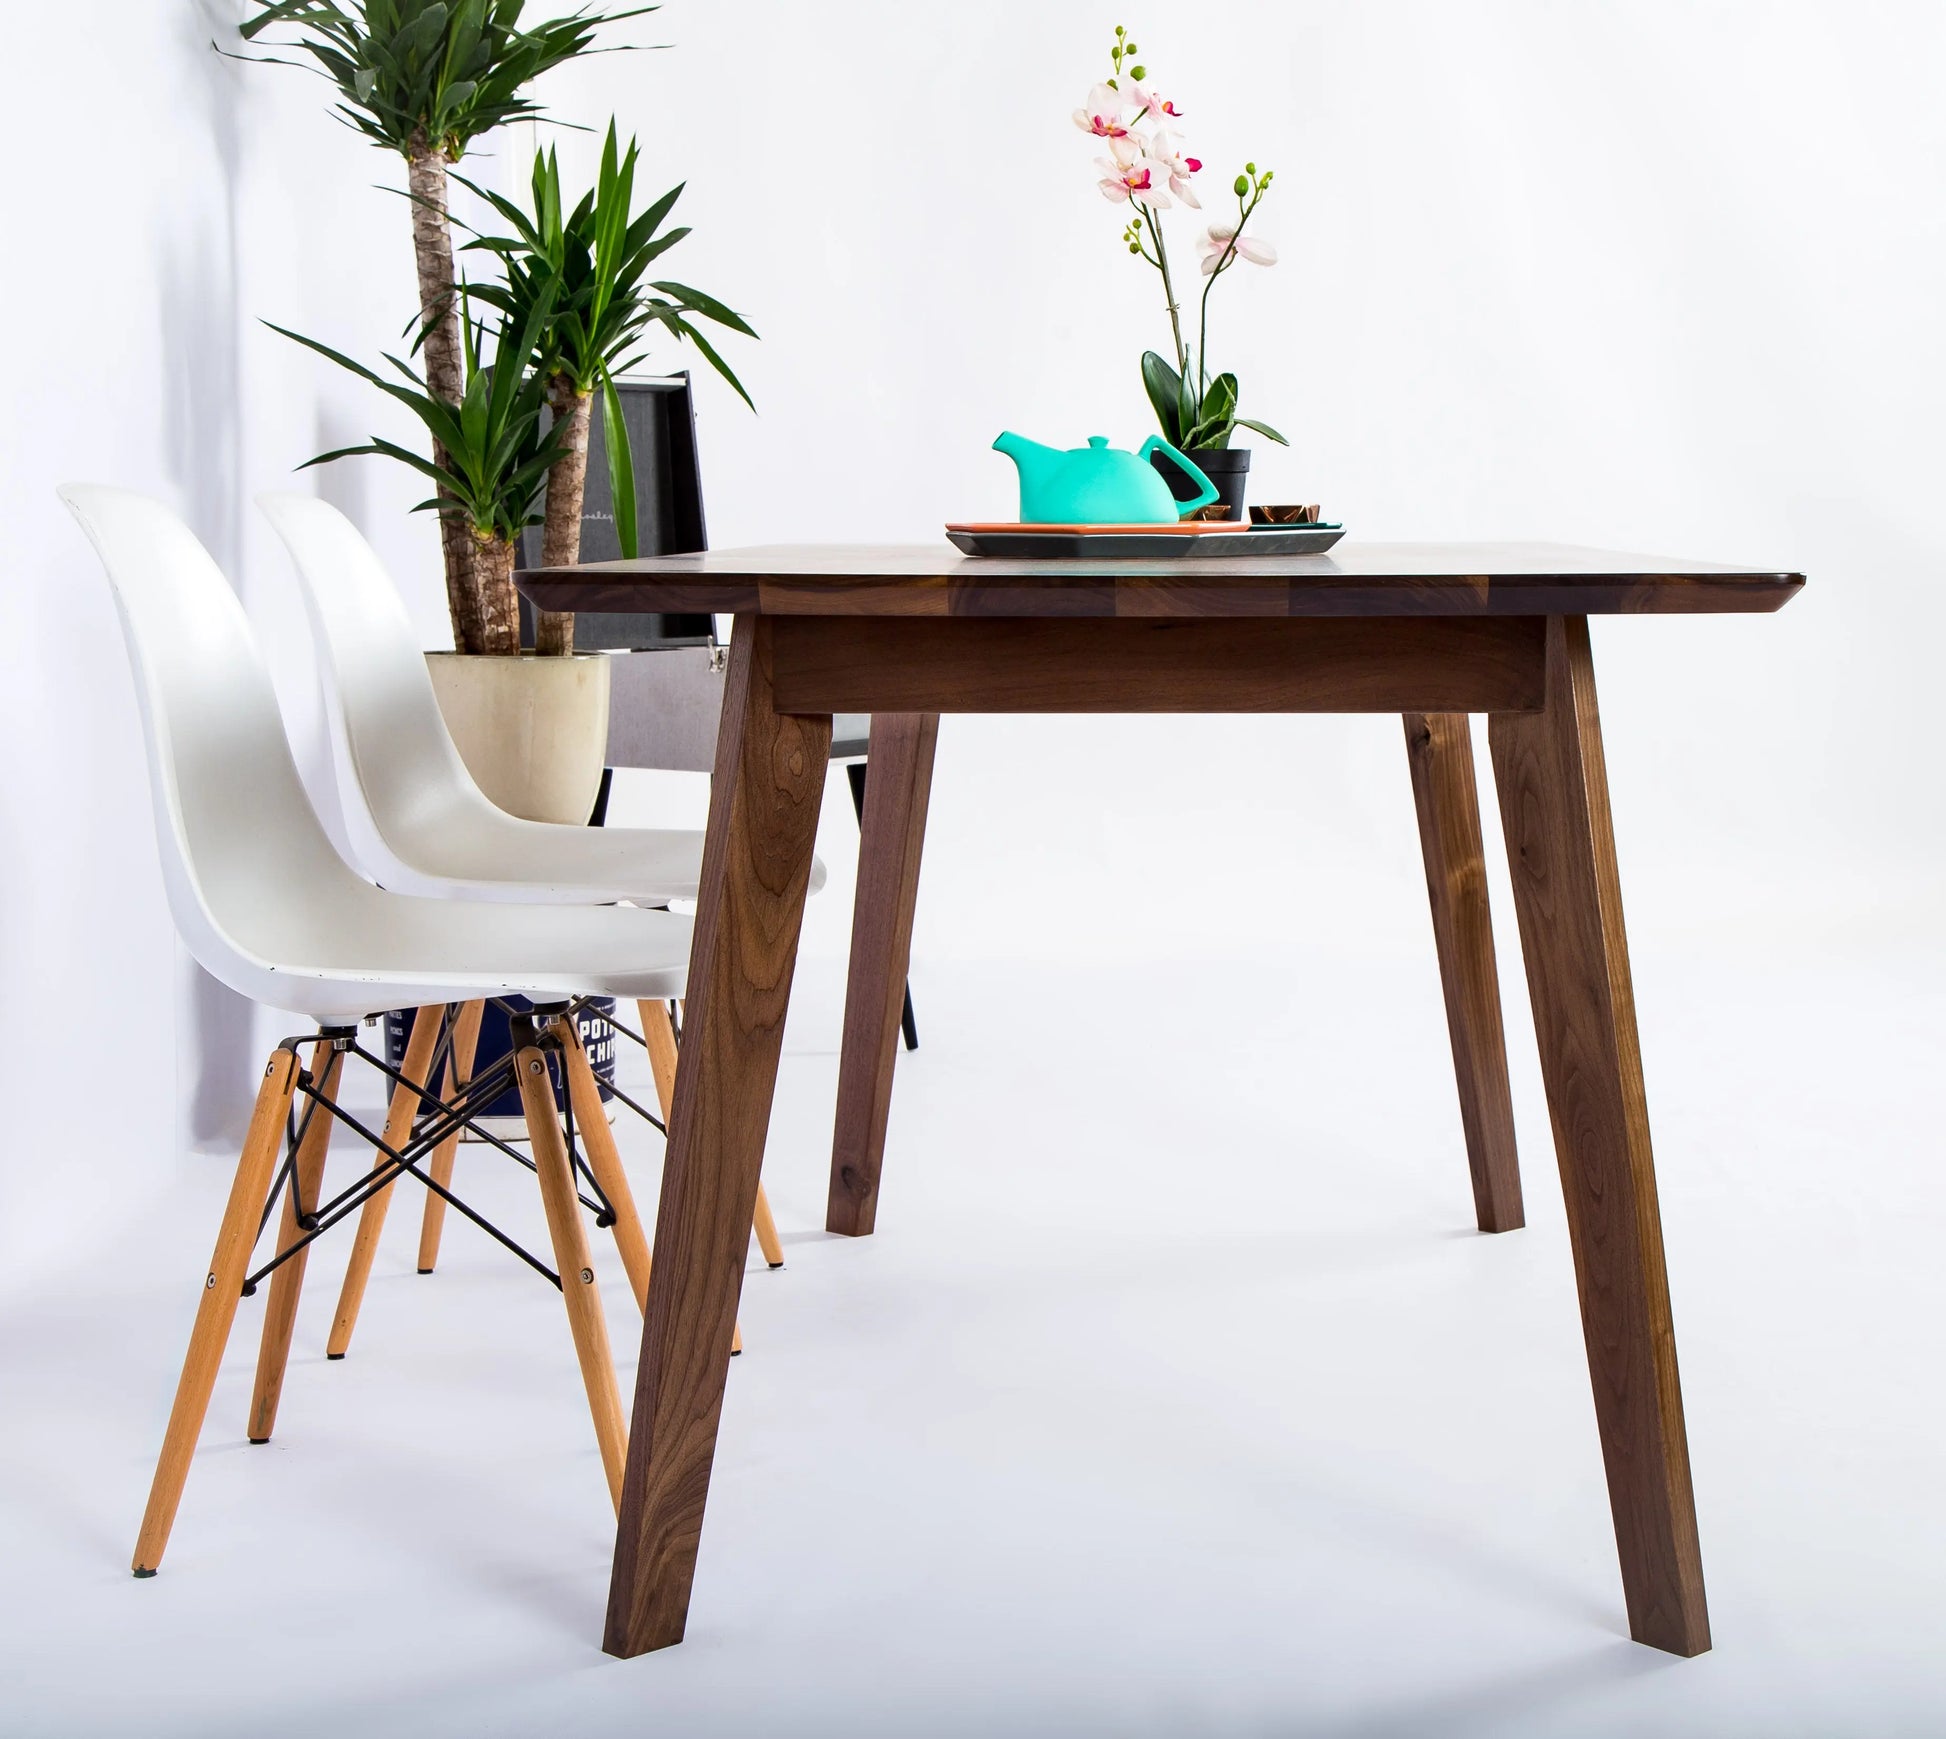 Tapered and angled solid walnut leg system of the small Bossa Nova table